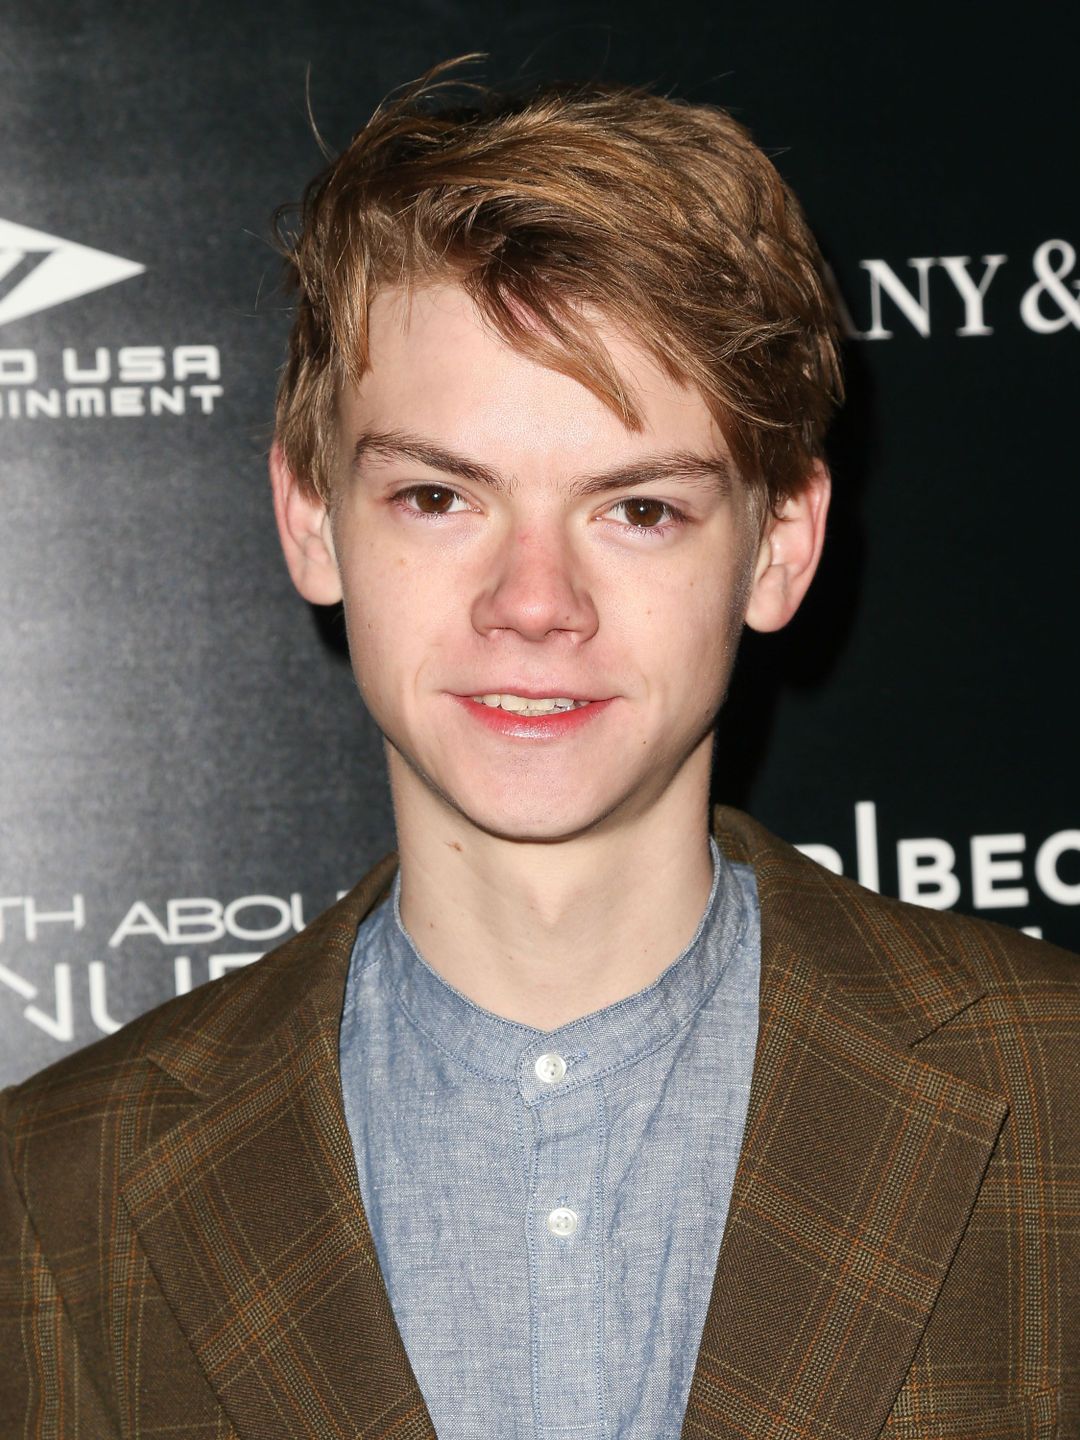 Thomas Sangster date of birth